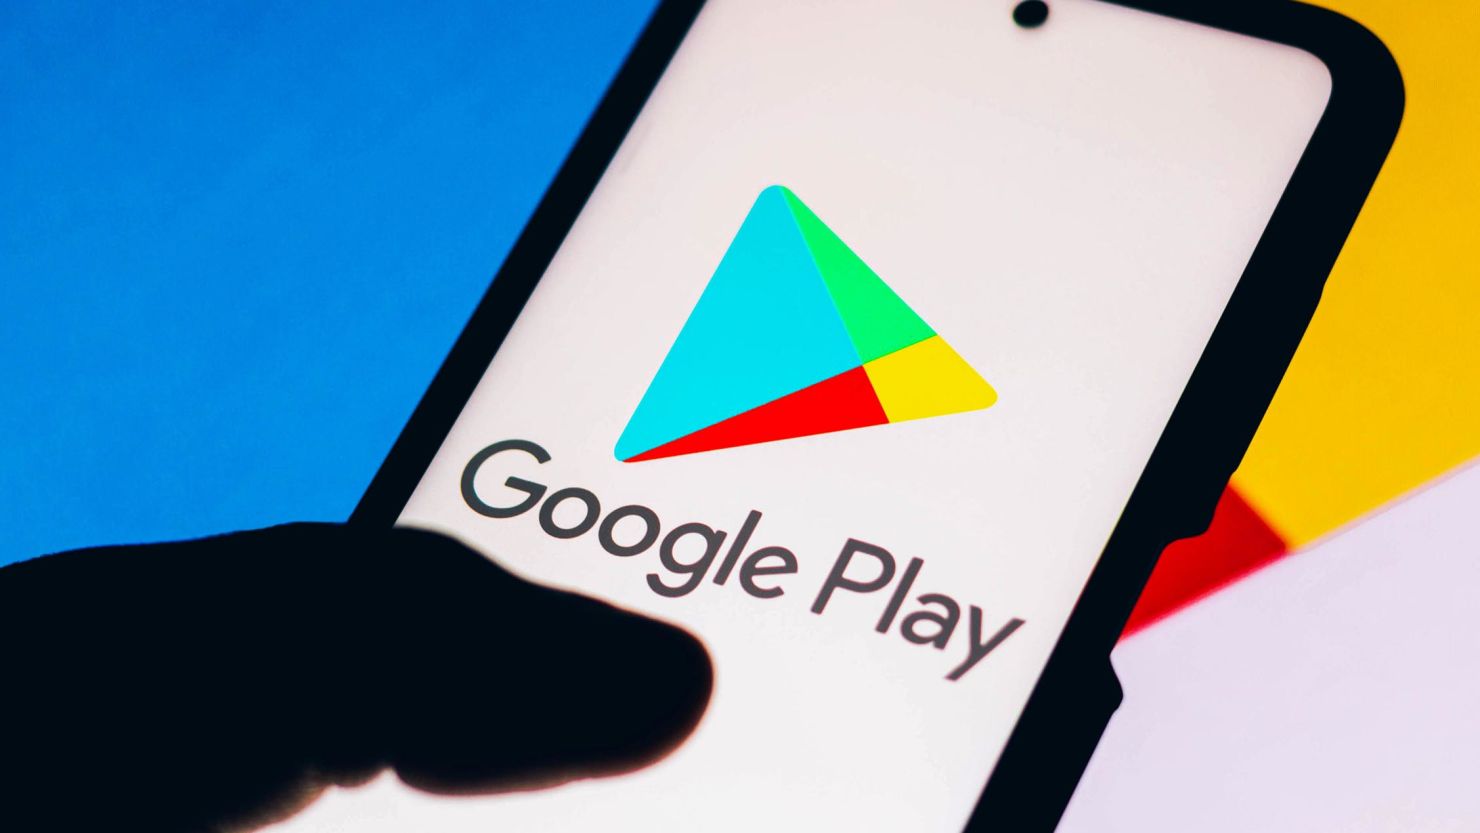 Google Play improvements: new rating system and auto-open apps